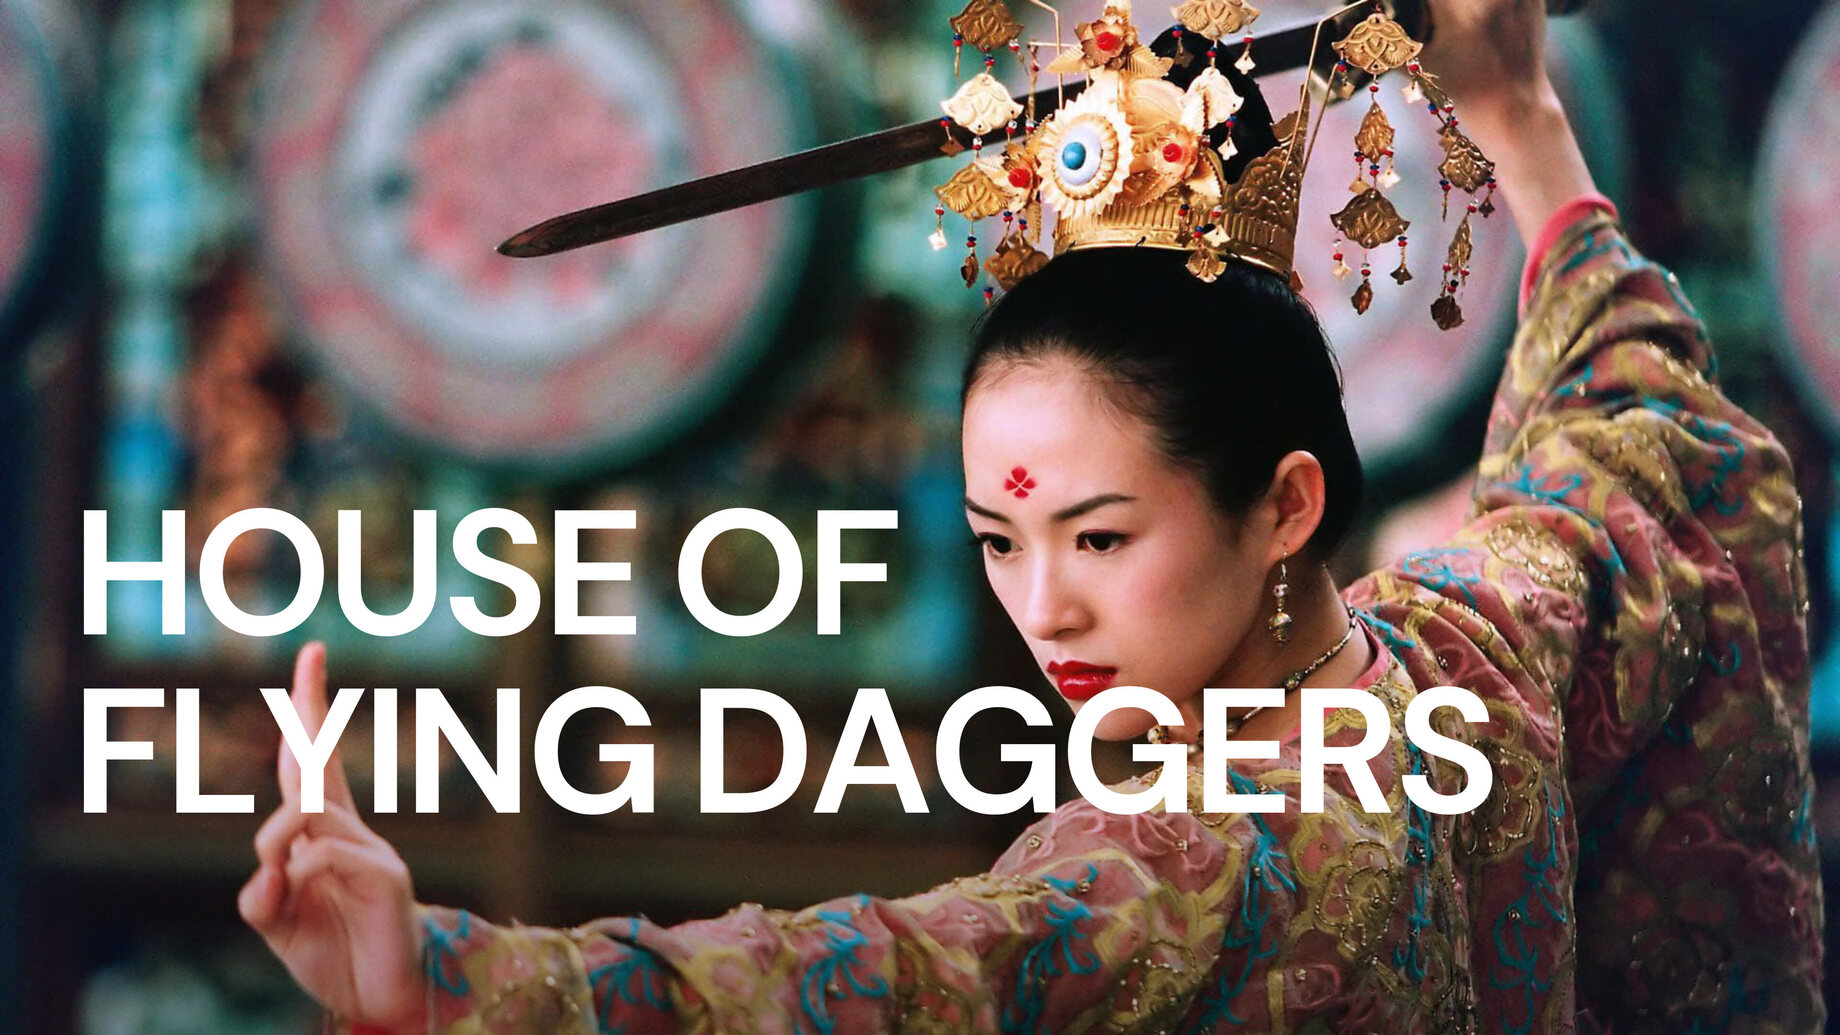 35 Facts about the movie House of Flying Daggers - Facts.net